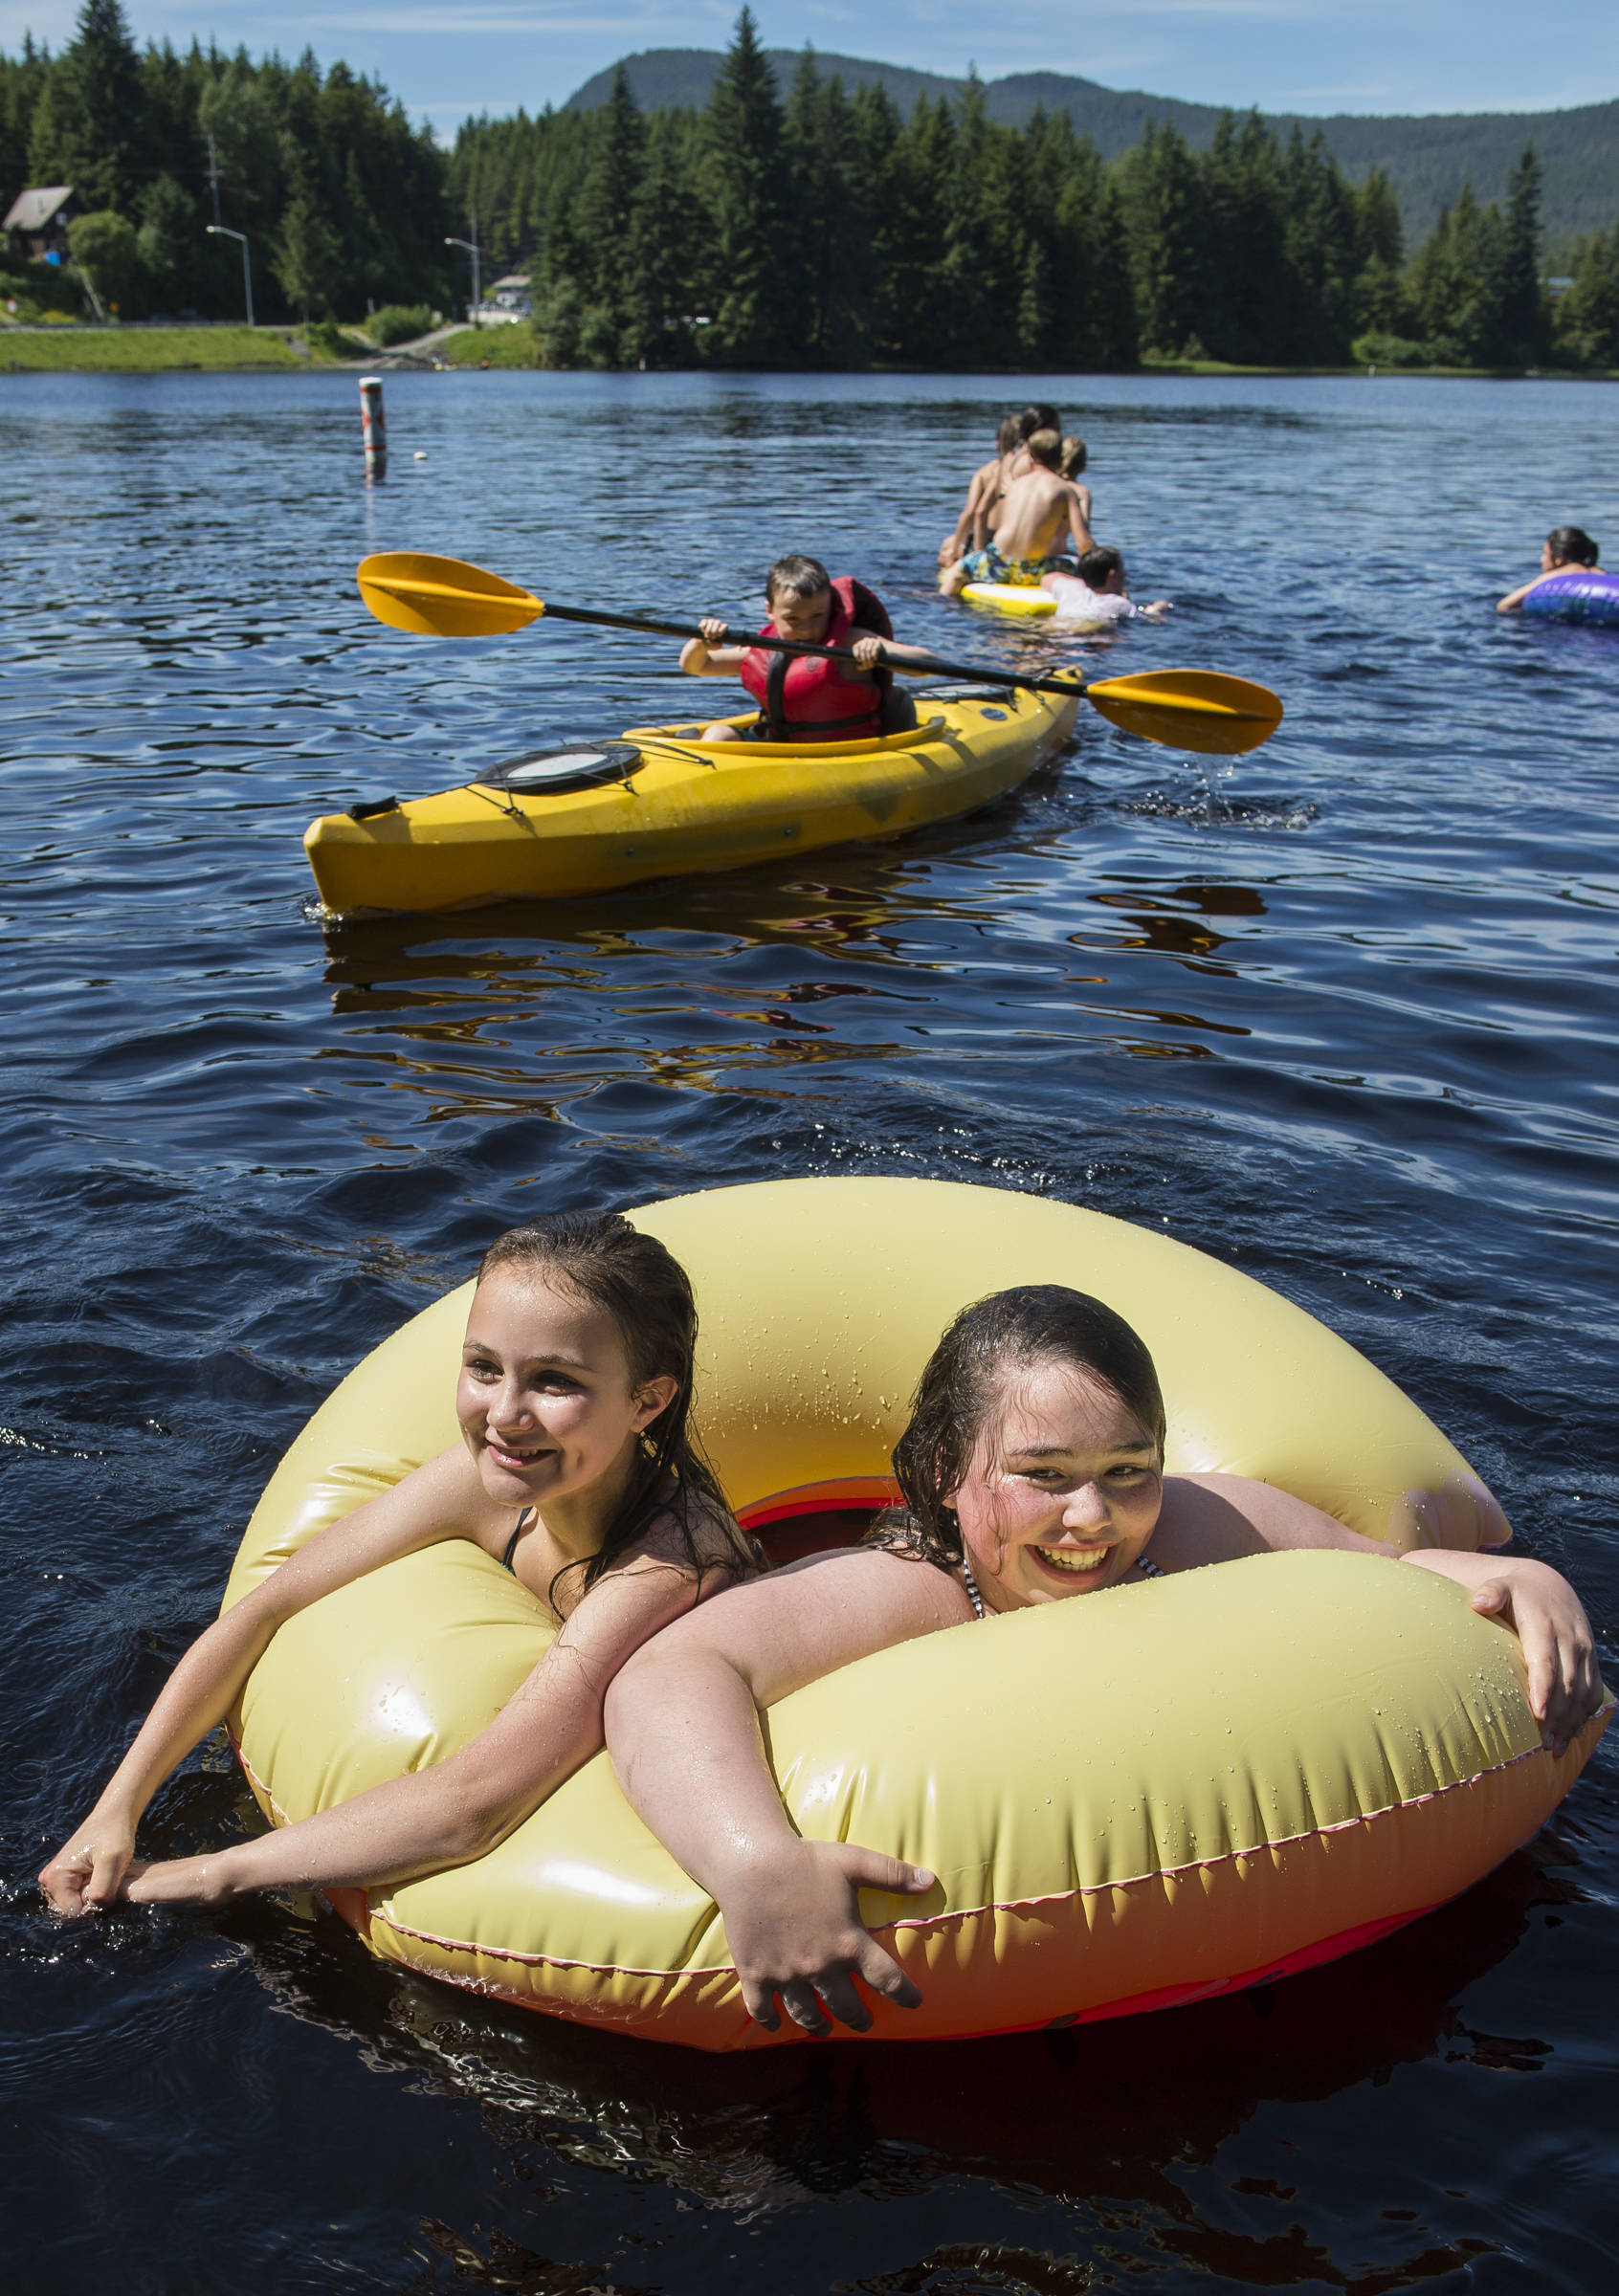 Jaden Capua-Flores, left, and Piper Robidoux, both 13, share a float as they cool off with other children at Auke Lake on Tuesday, June 19, 2018. (Michael Penn | Juneau Empire)